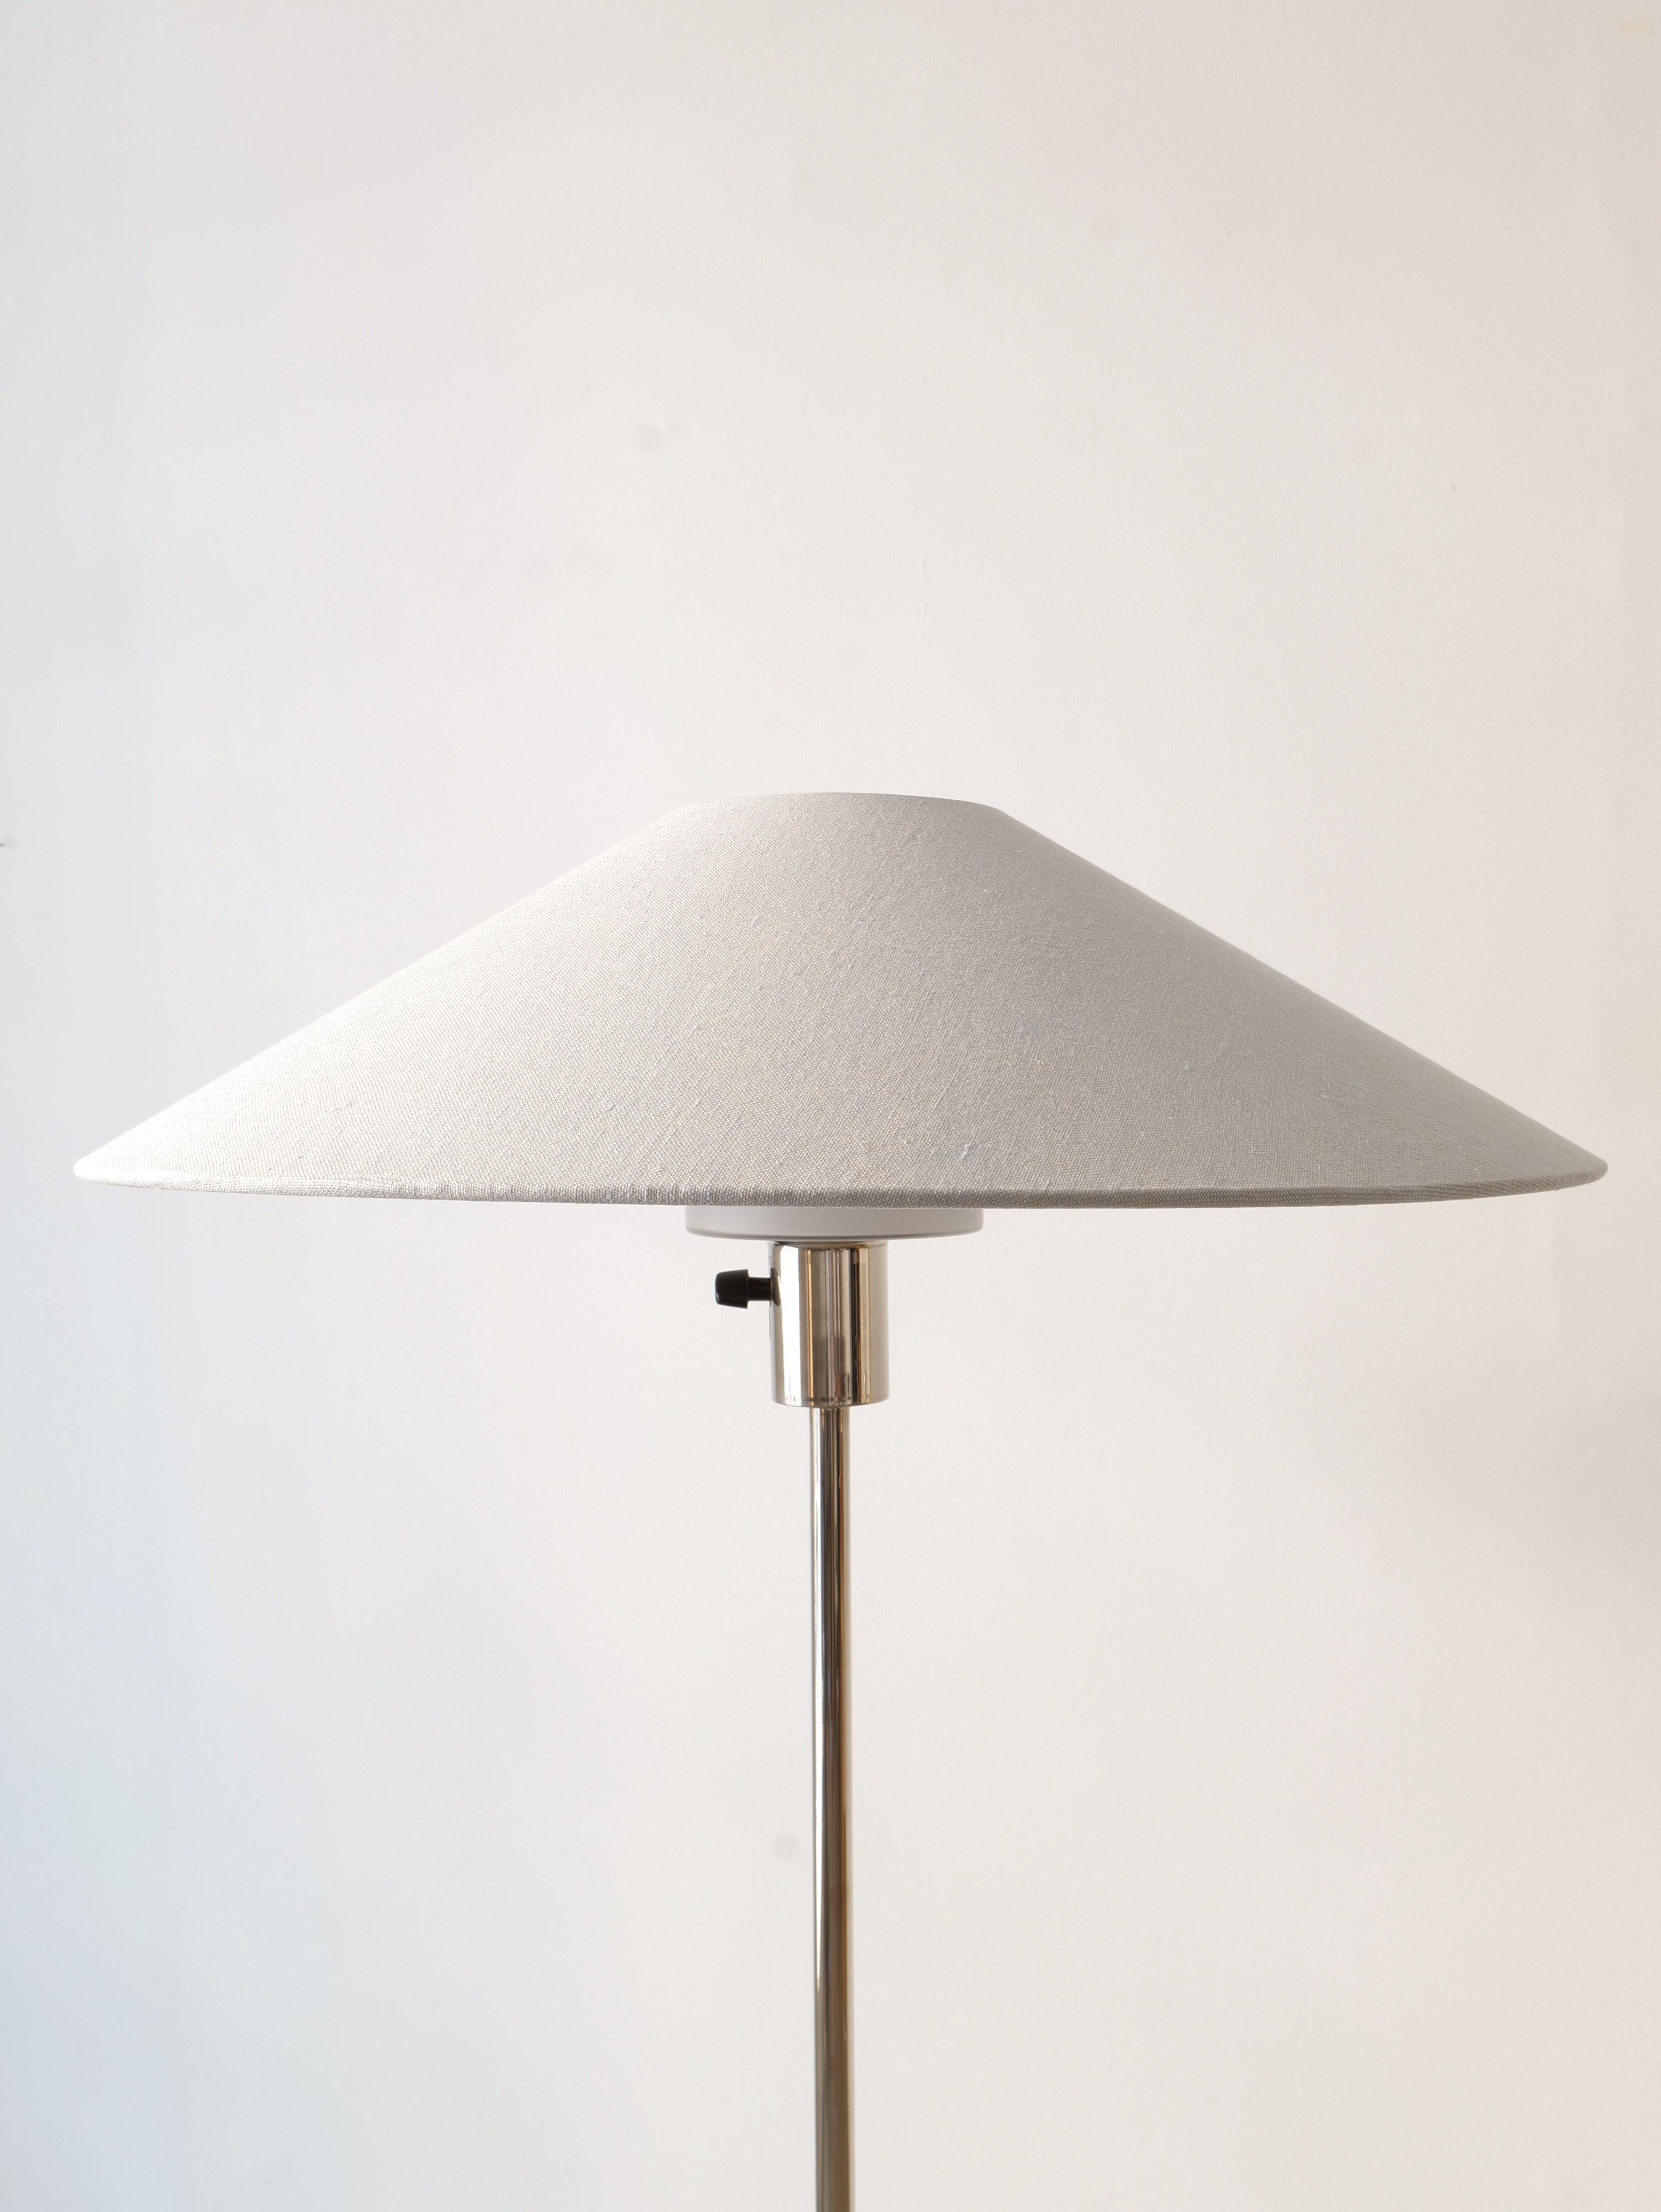 A Deco Floor Lamp Harald Notini 1940s with a conical white fabric shade and a sleek, slender metallic stand embodies Swedish Modern design. Reminiscent of Harald Notini's timeless creations from Arvid Böhlmarks Lamp Factory, it stands elegantly against a plain white background. This beautiful piece is featured in the Collection apart brand.